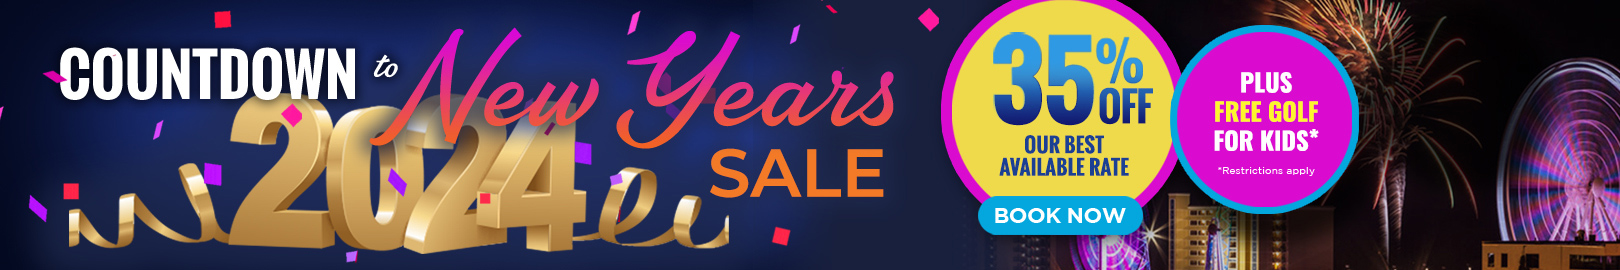 Countdown to New Year's Sale - 40% Off